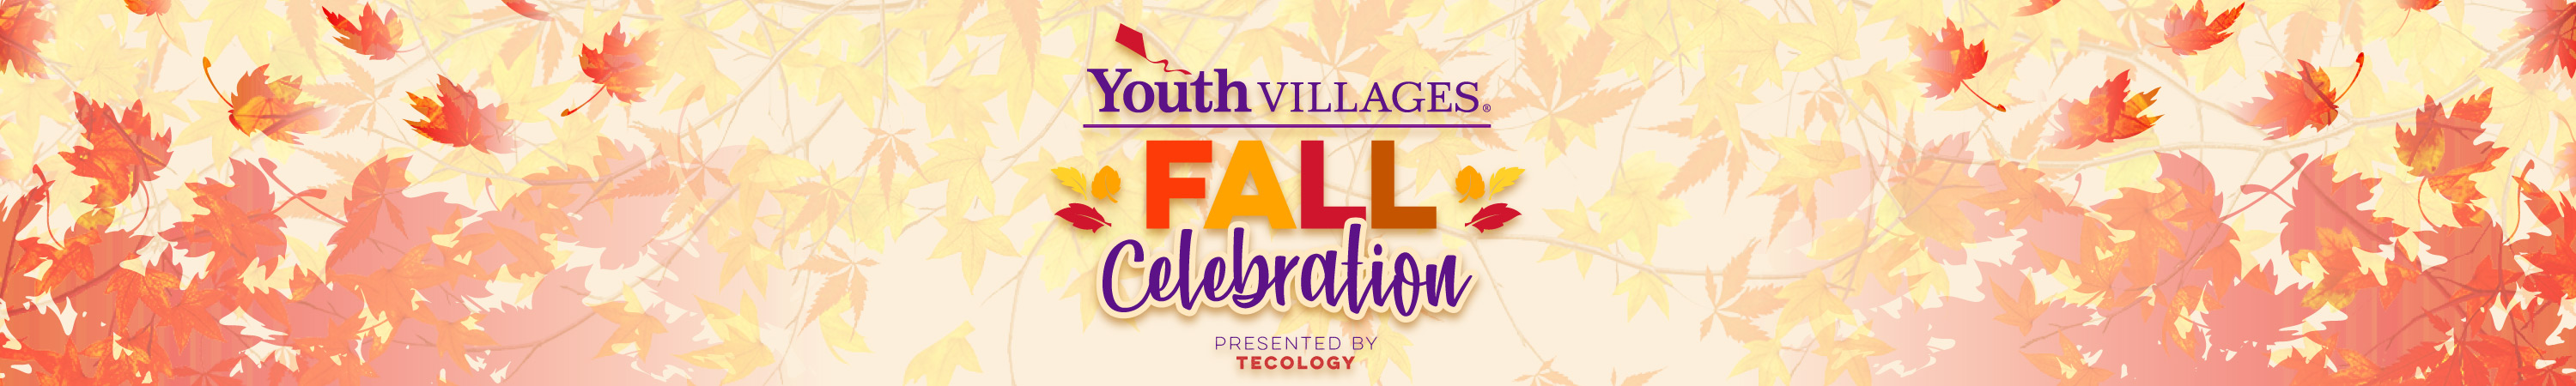 Youth Villages Fall Celebration